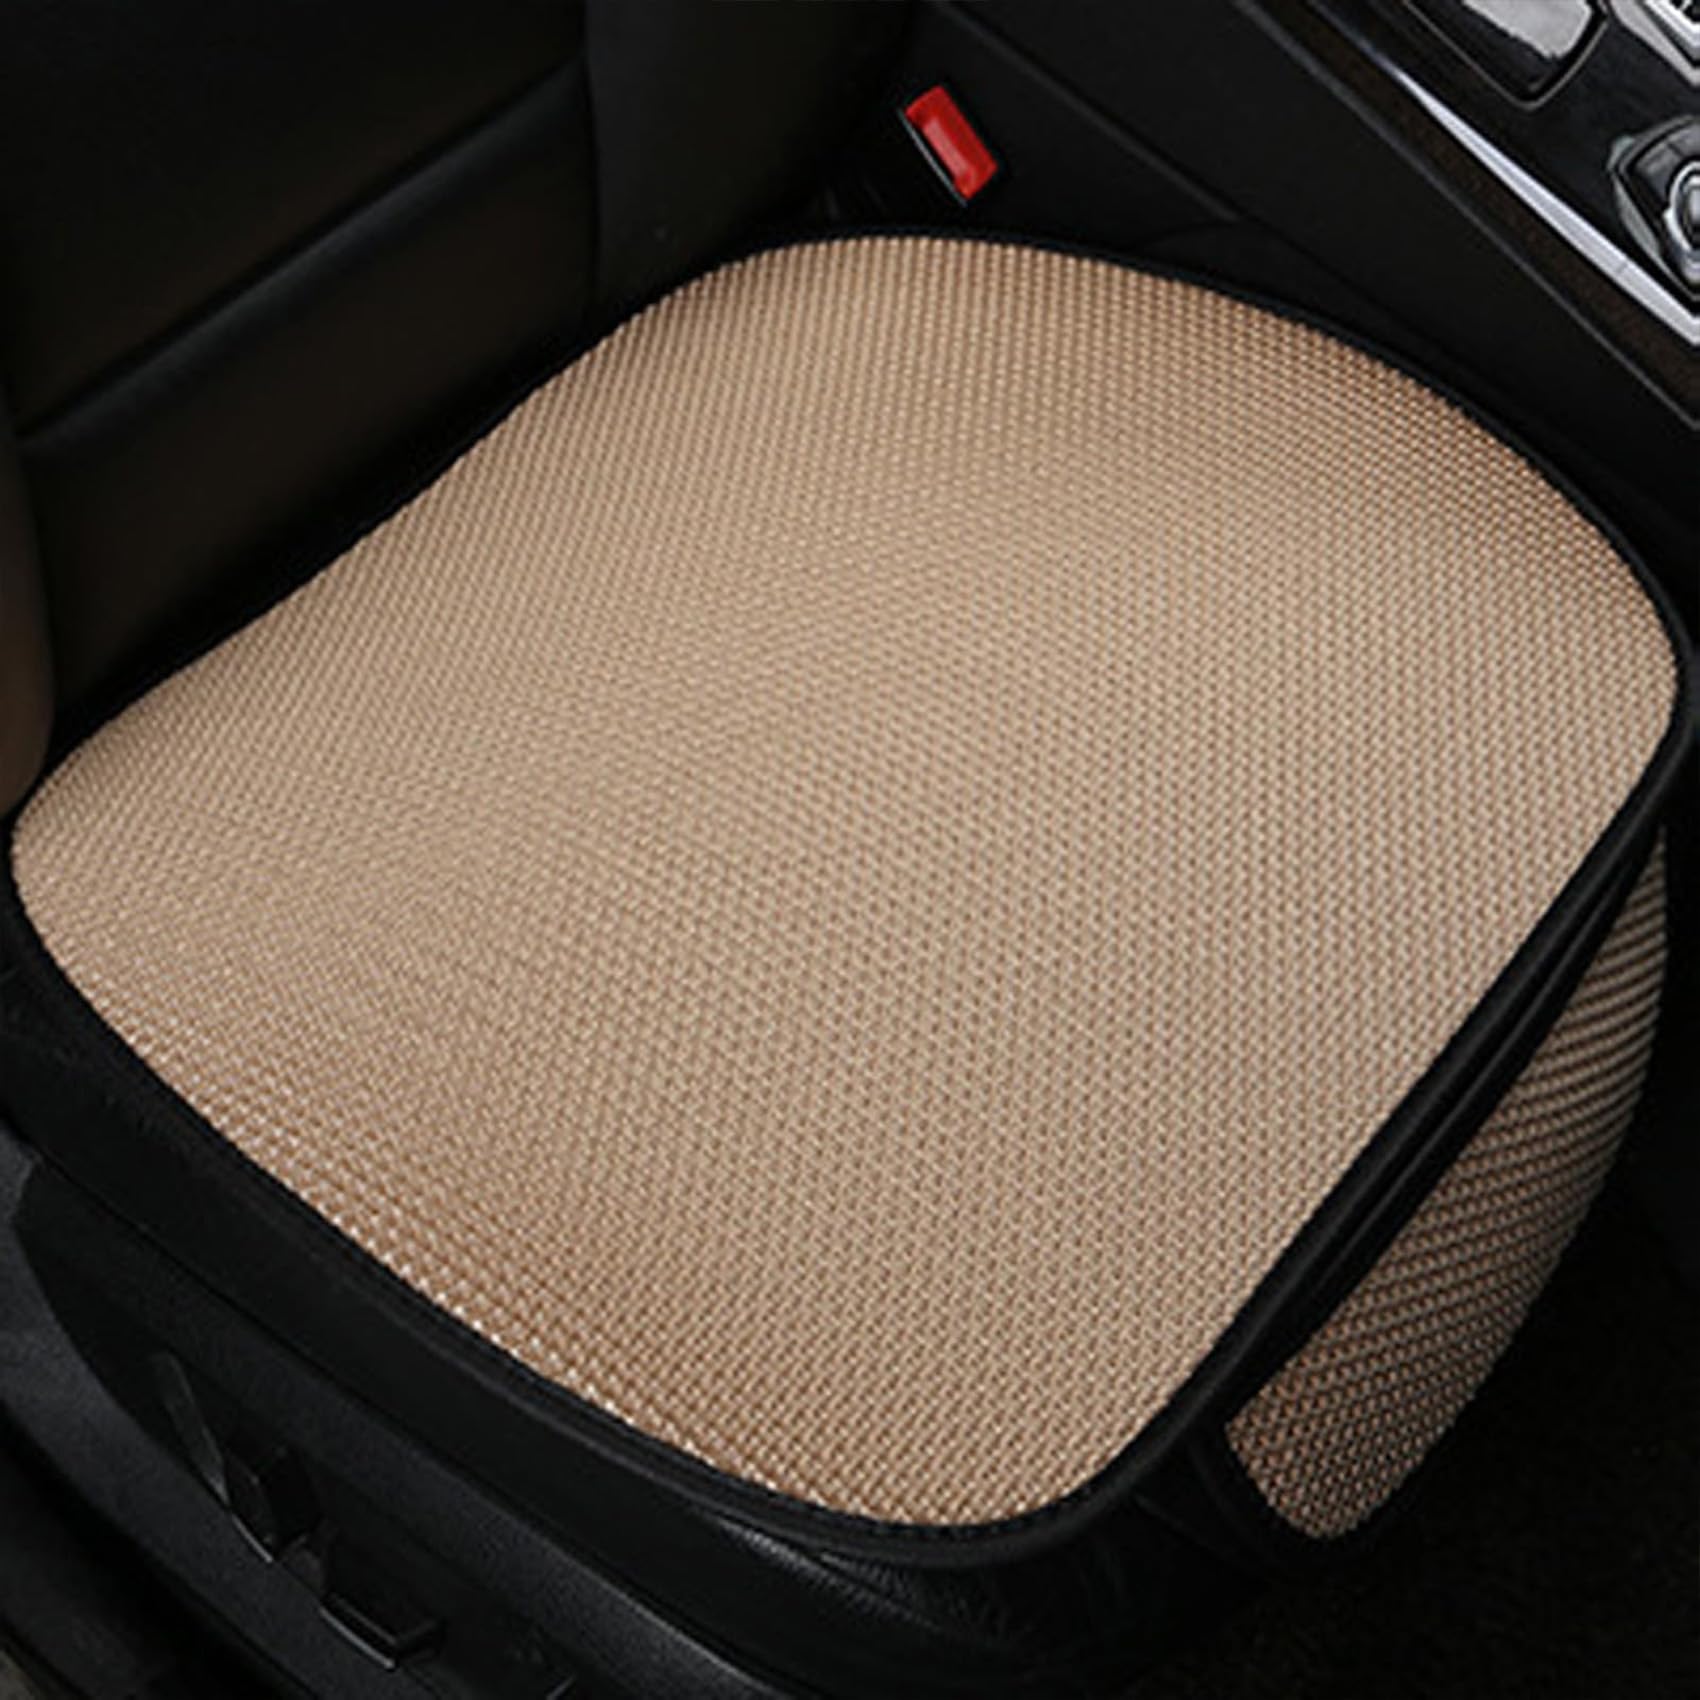 Non-slip Car Seat Pad for Summer Breathable and Refreshing, Breathable & Anti-Slip Cotton Car Seat Covers for Summer Heat, Universal Bottom Seat Covers for Cars of Front Seats (Beige,Front Seat-2Pcs) von YODAOLI